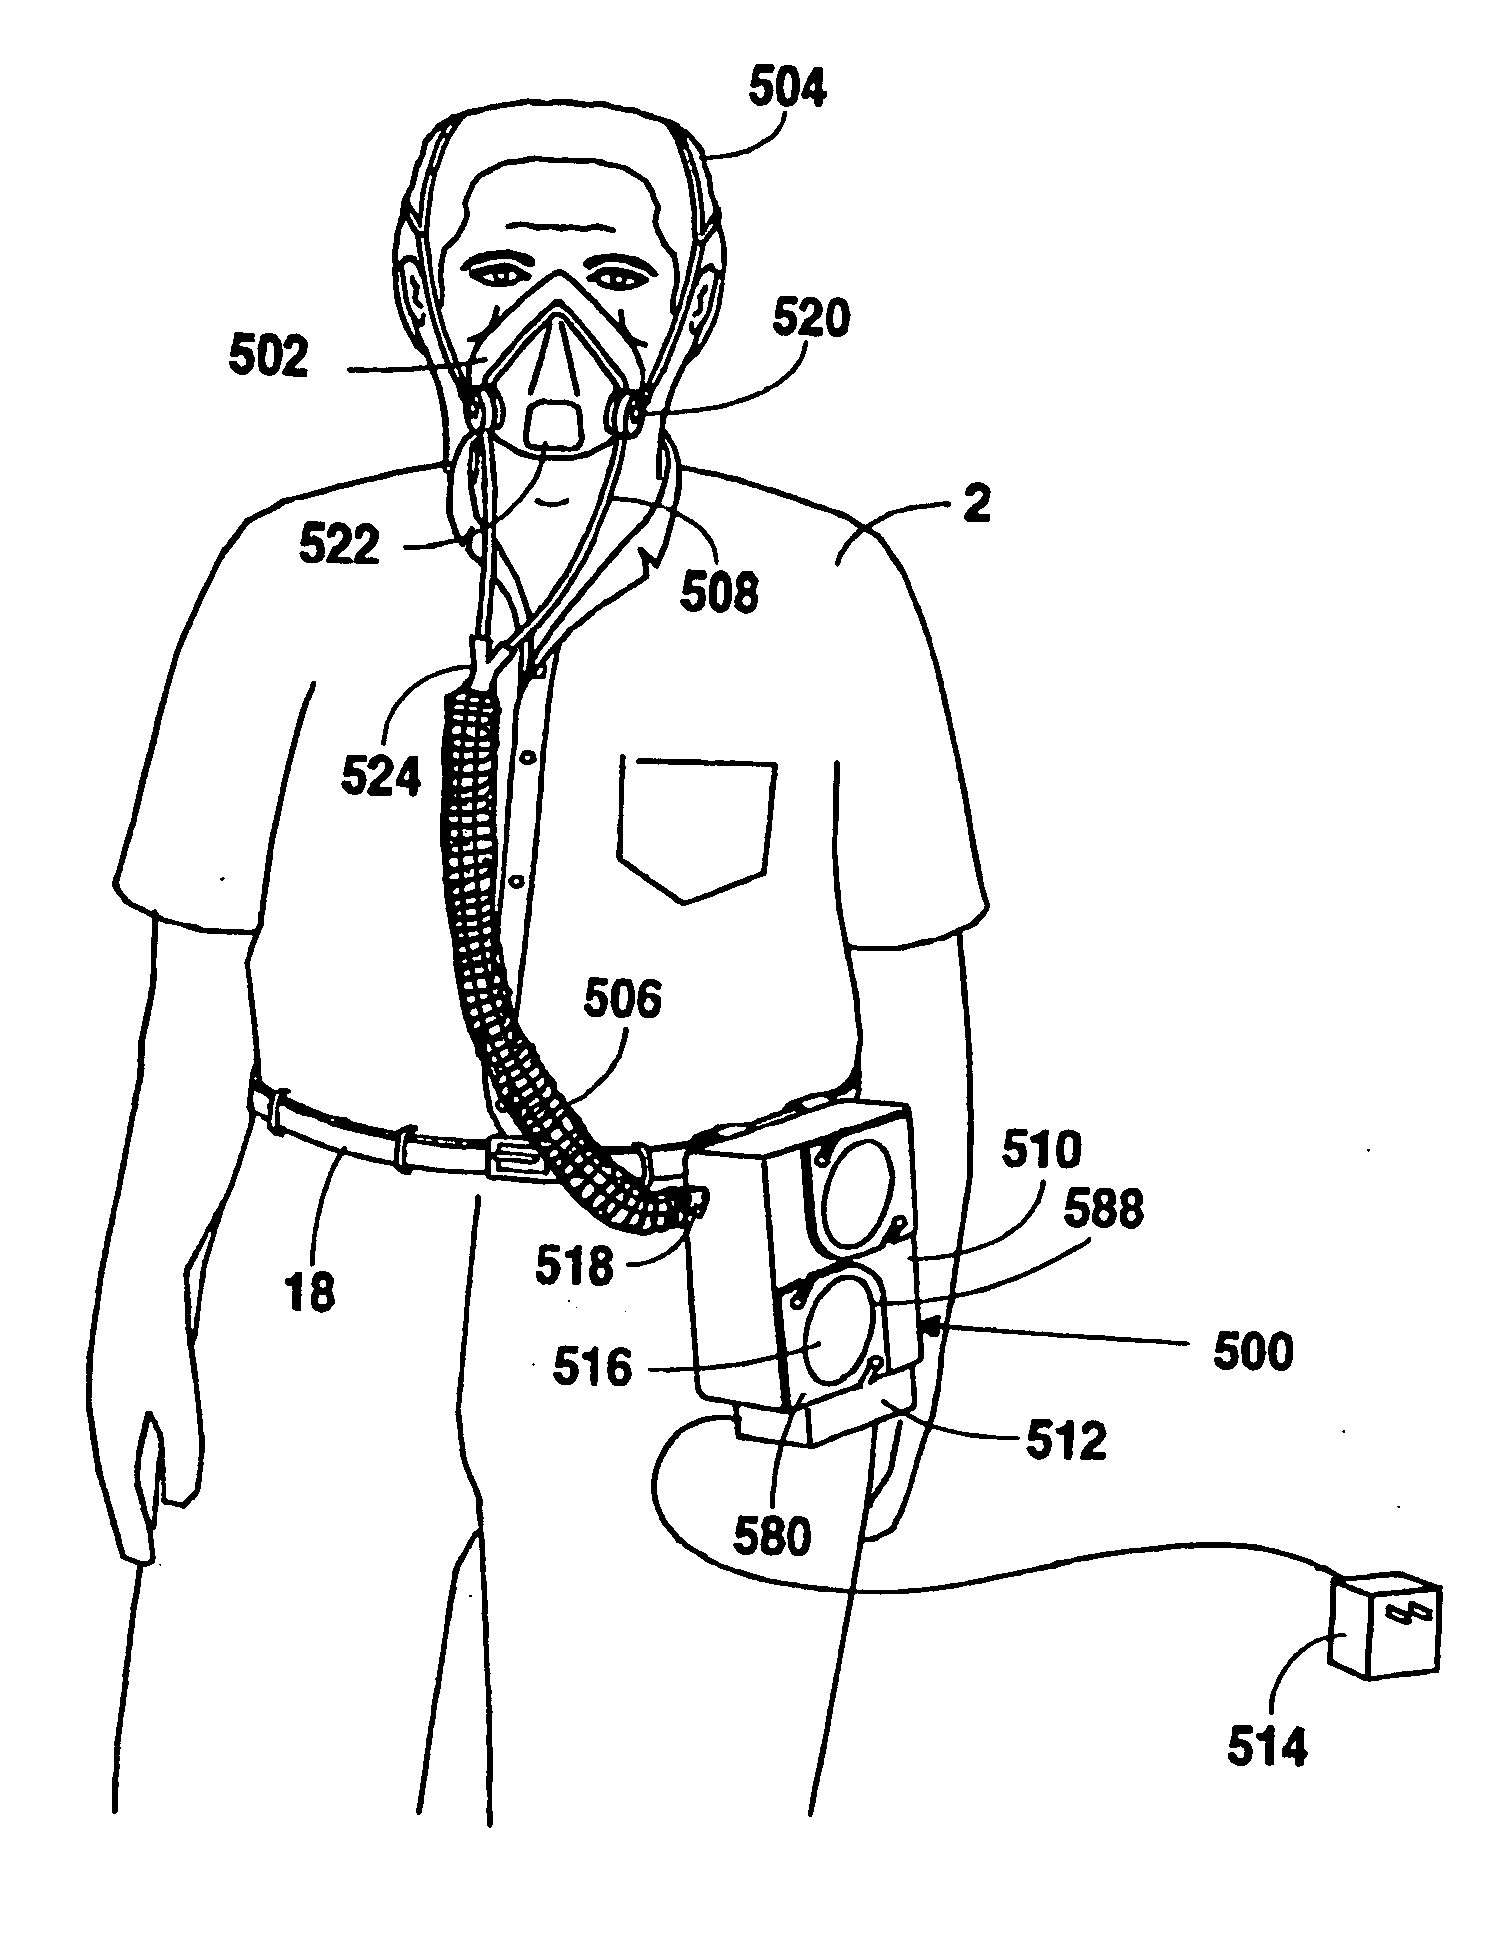 Personal air filtering and isolation device